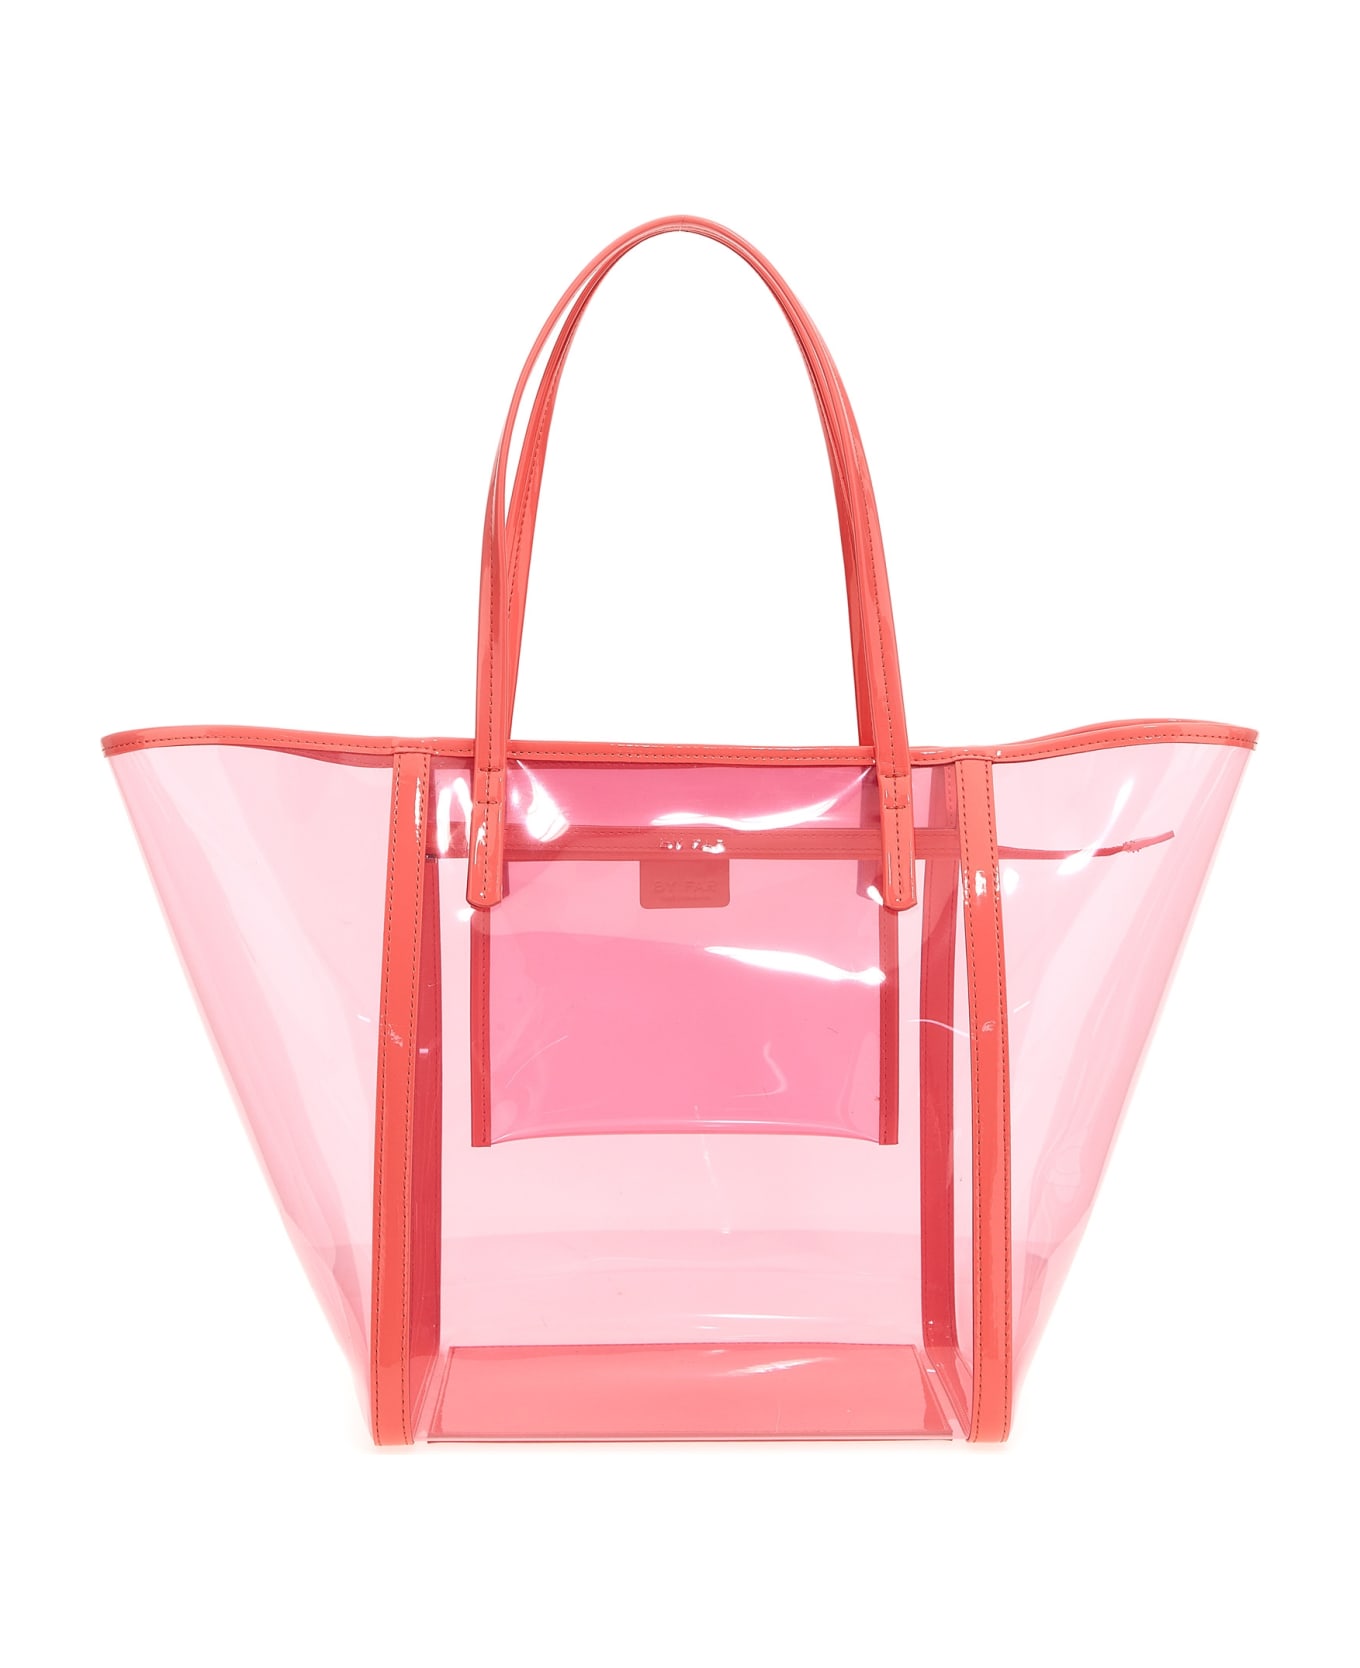 BY FAR Shopping 'club Tote' - Pink